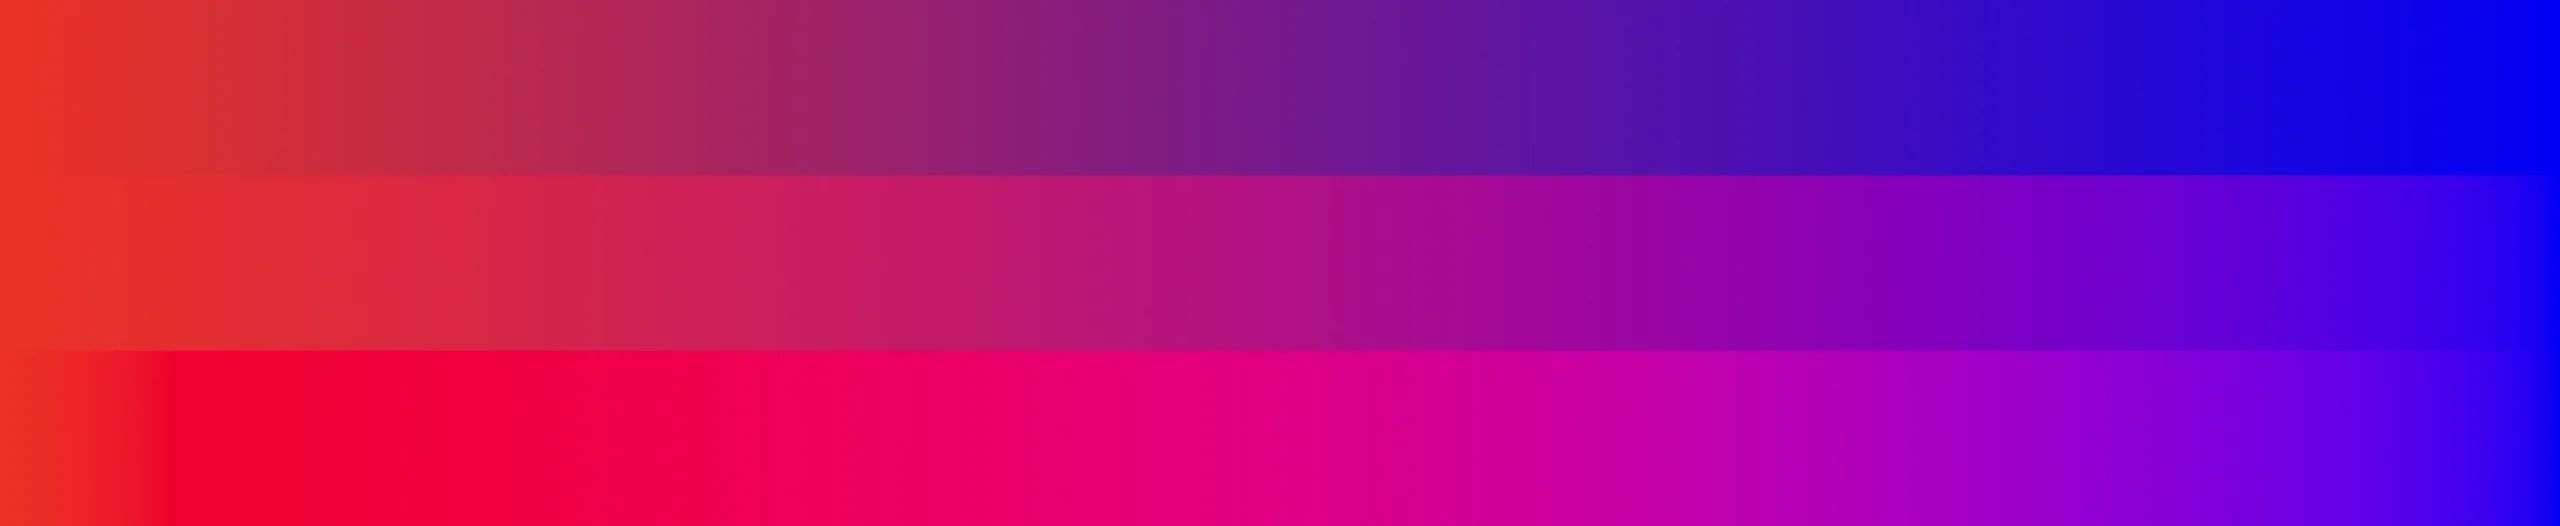 Three stripes of red to purple gradients showing interpolation differences for sRGB, LAB, and LCH color spaces 